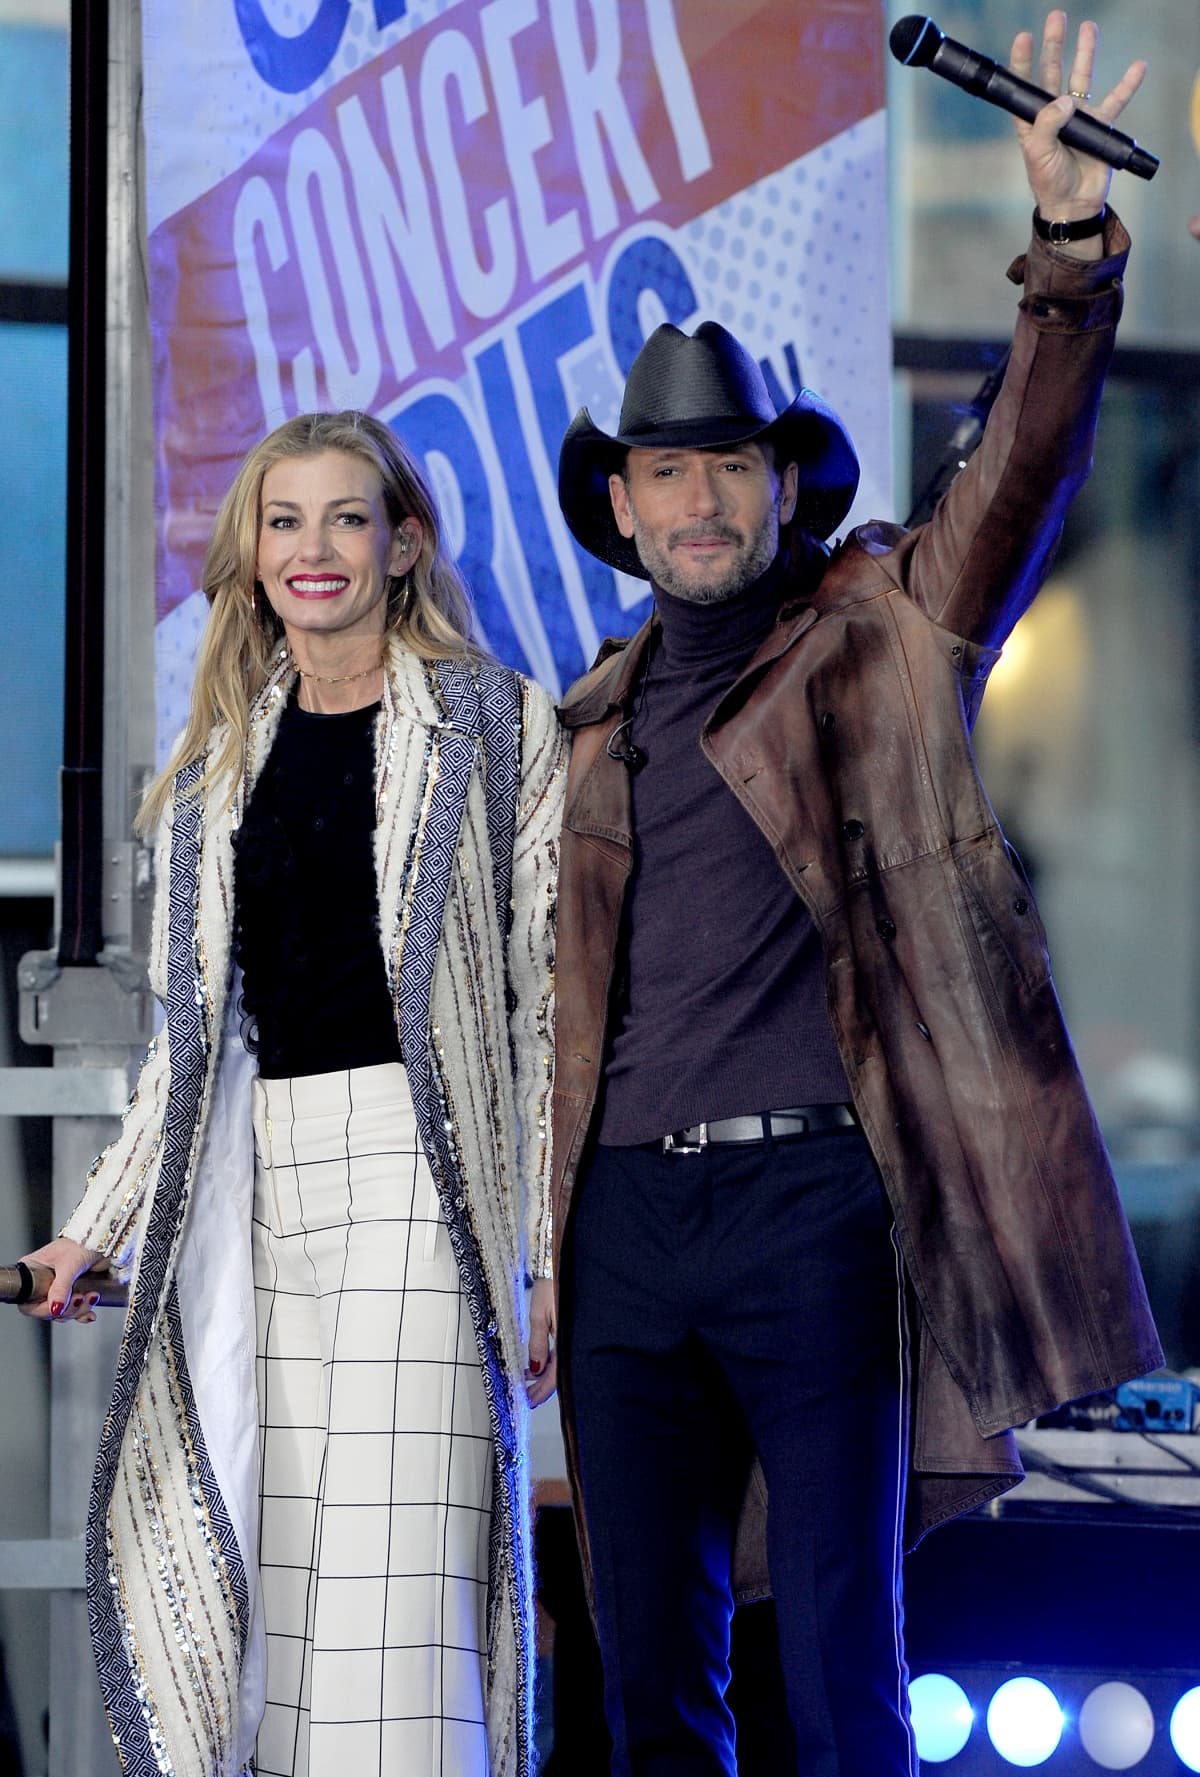 Faith Hill and Tim McGraw performing on the Today Show